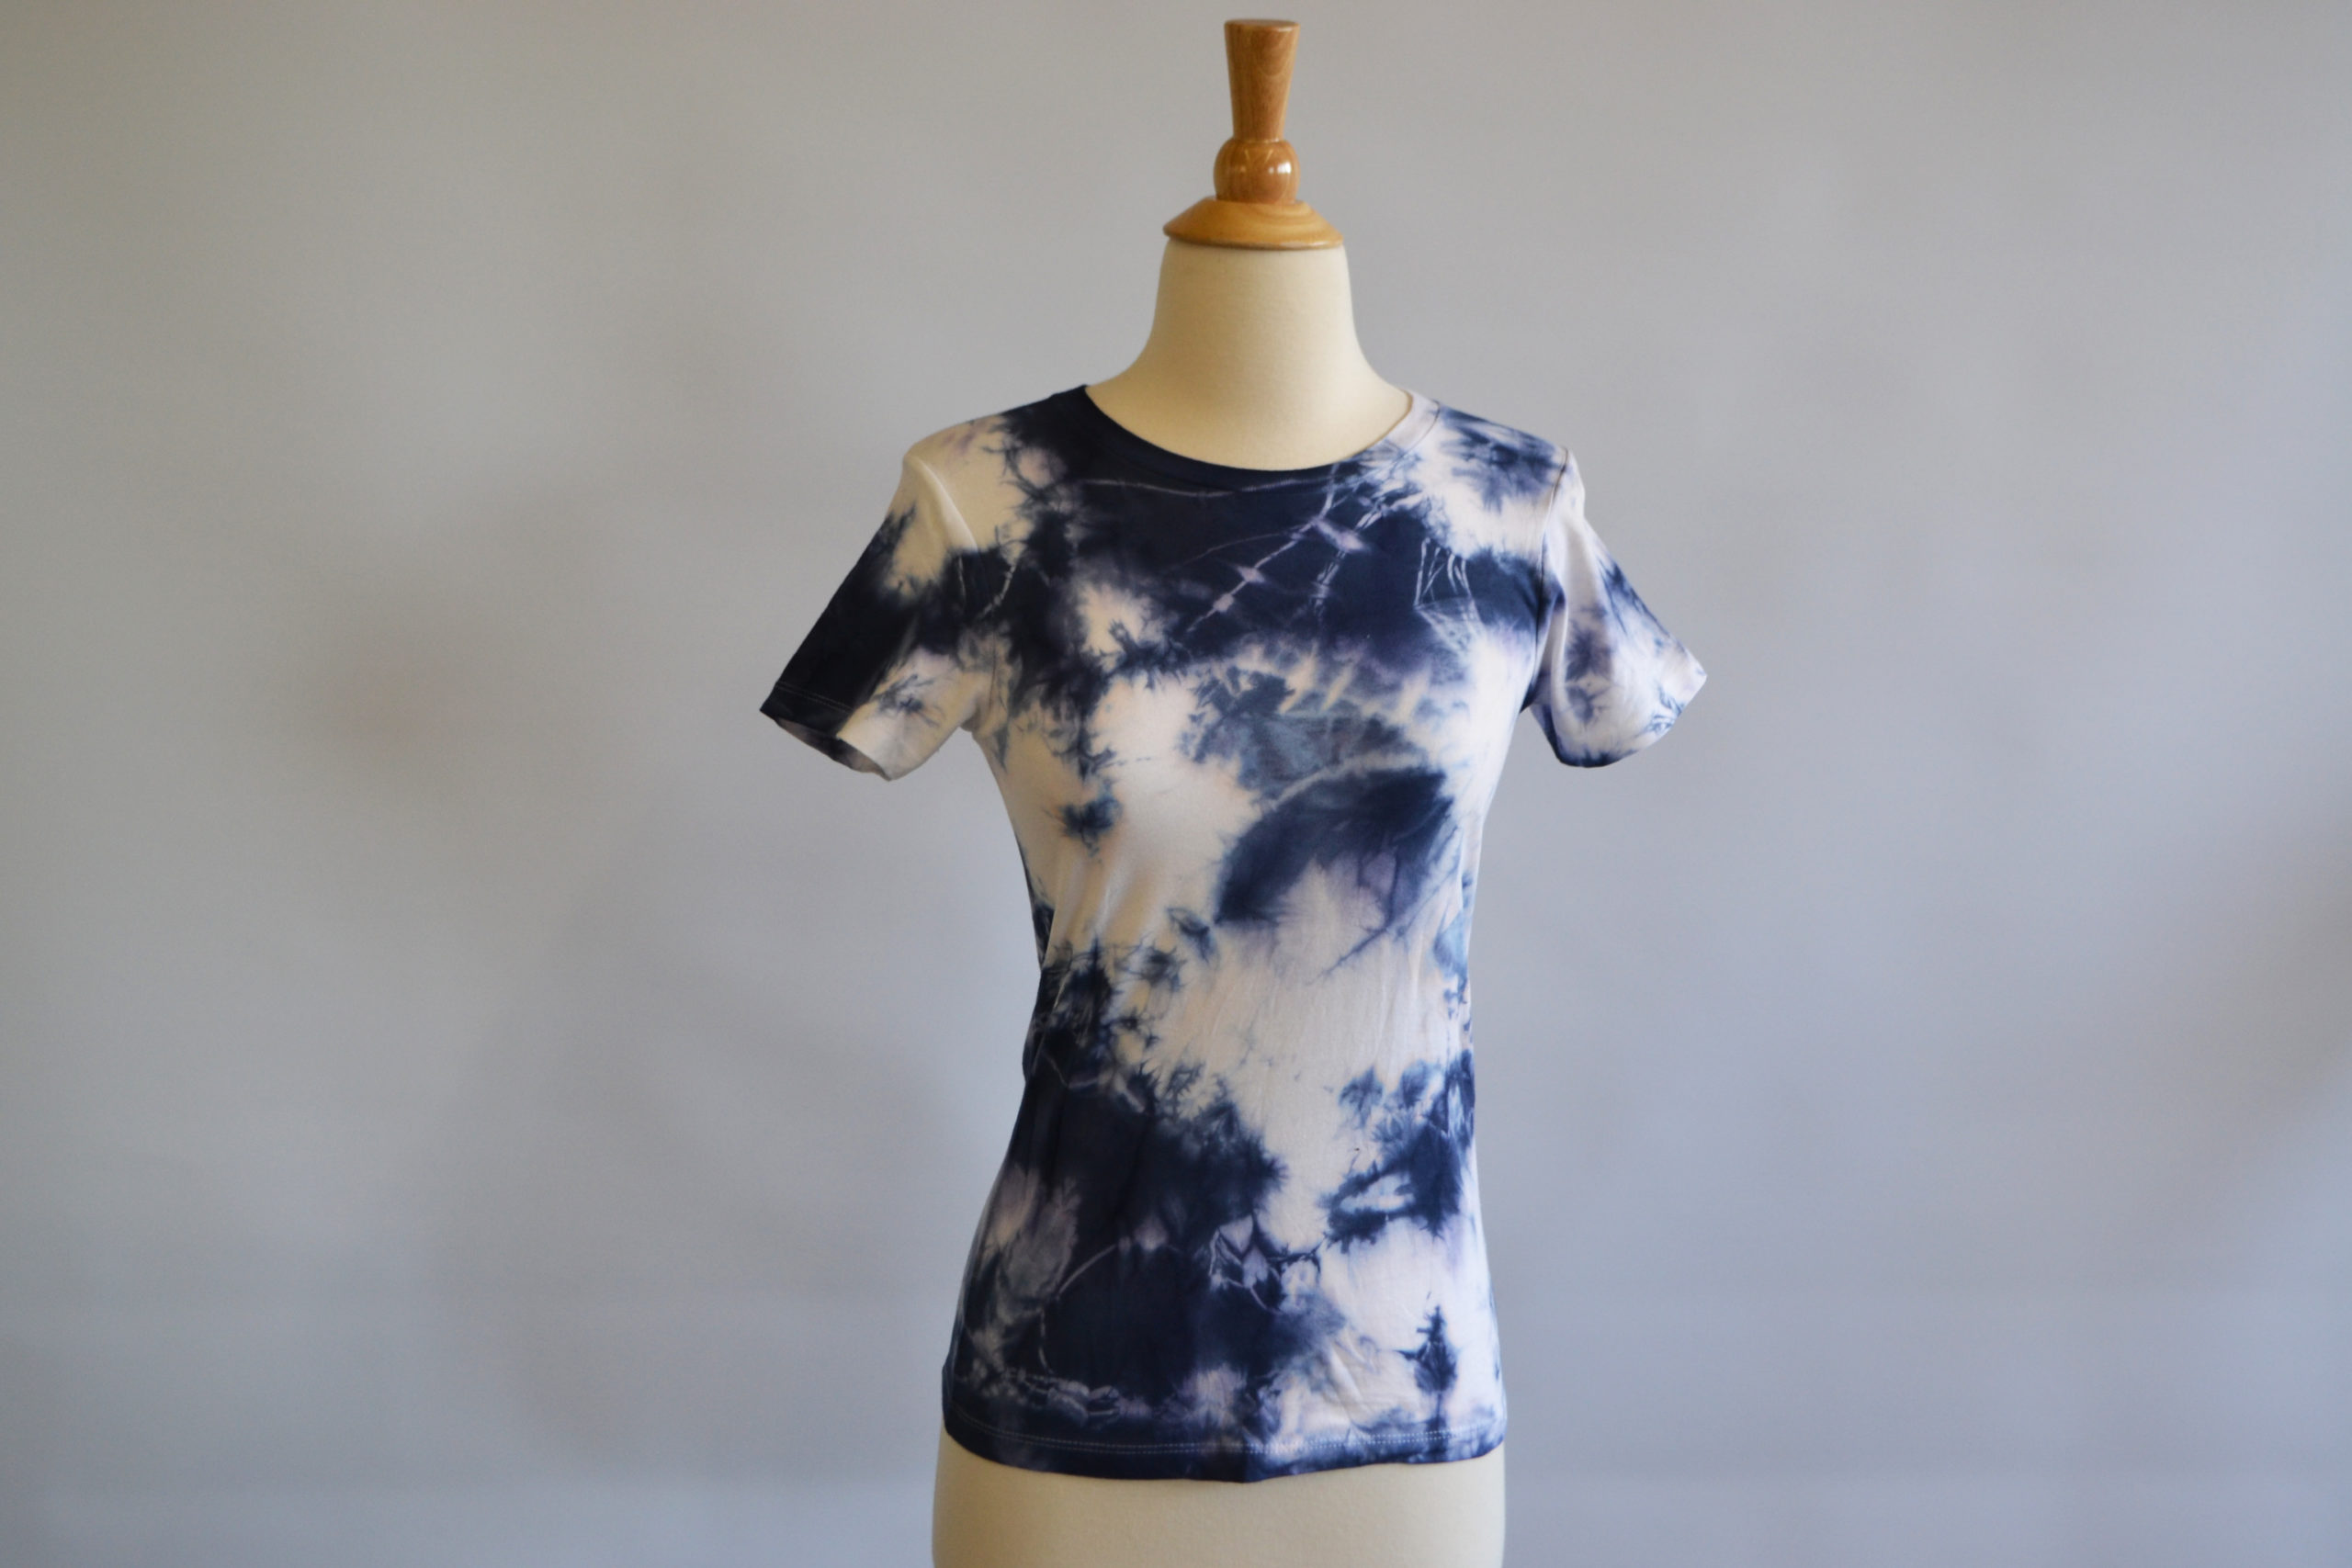 Tie-dyed T-shirt by Melissa Berman